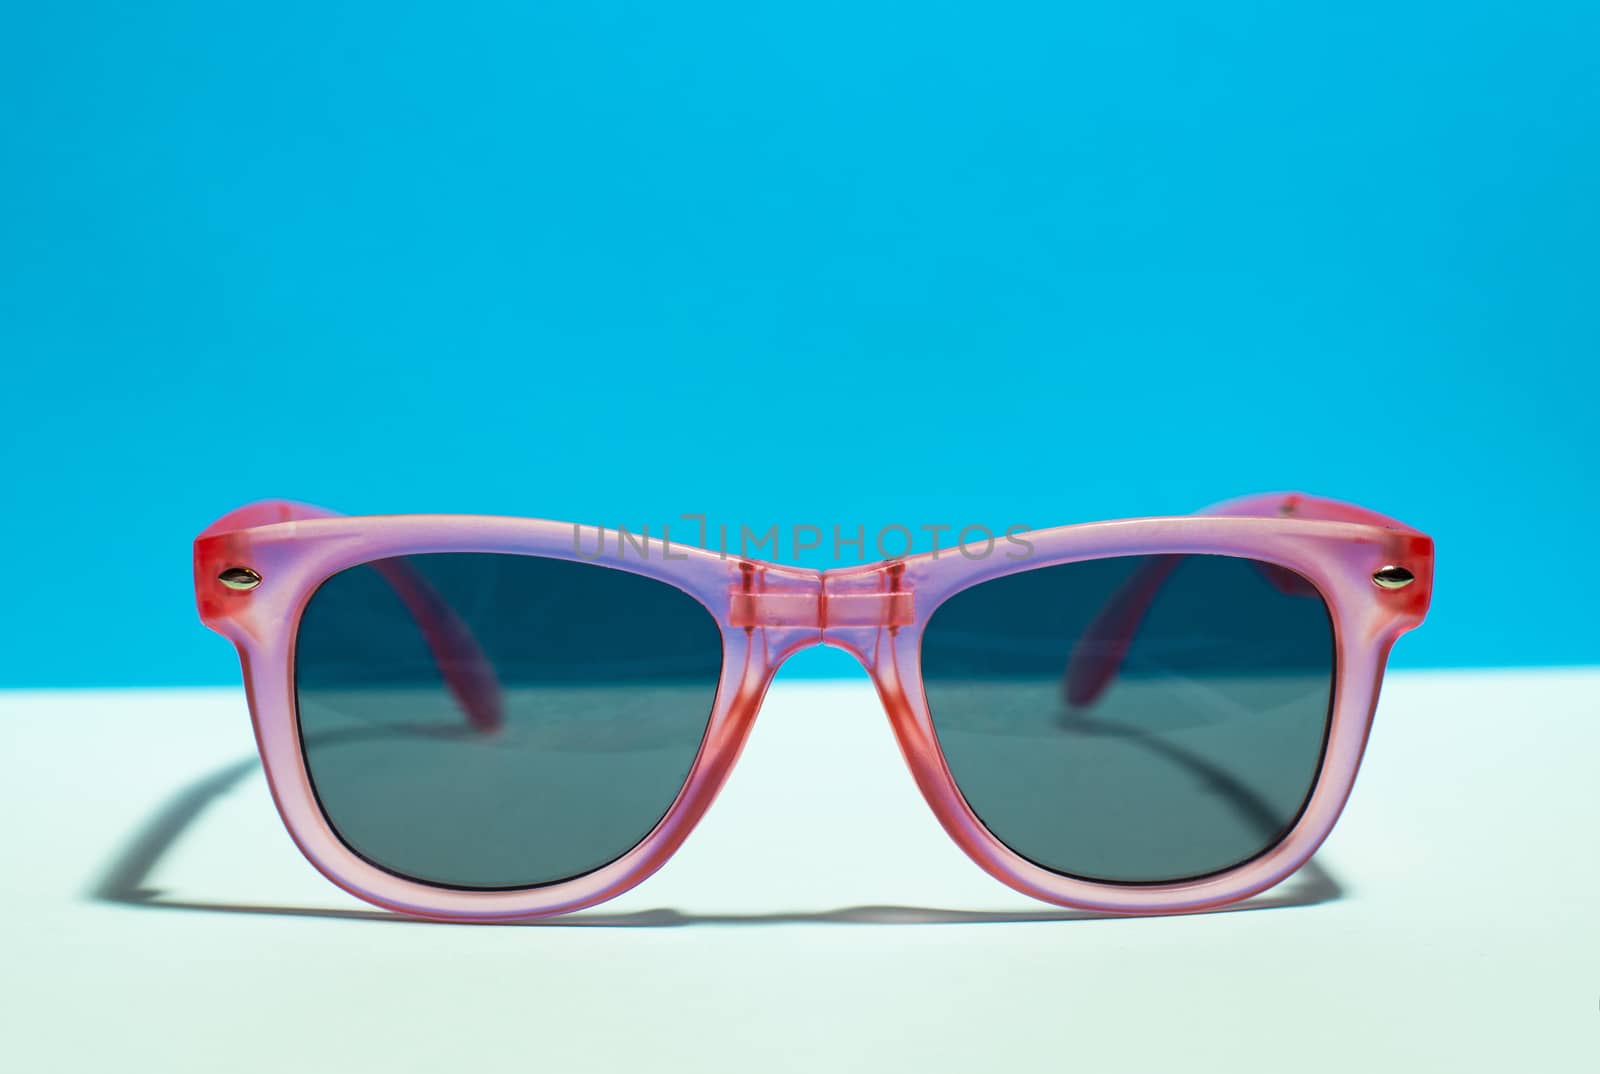 Pink bright sunglasses on a pastel blue background. Summer time, party and vacations concept. Minimalism with sunglasses.